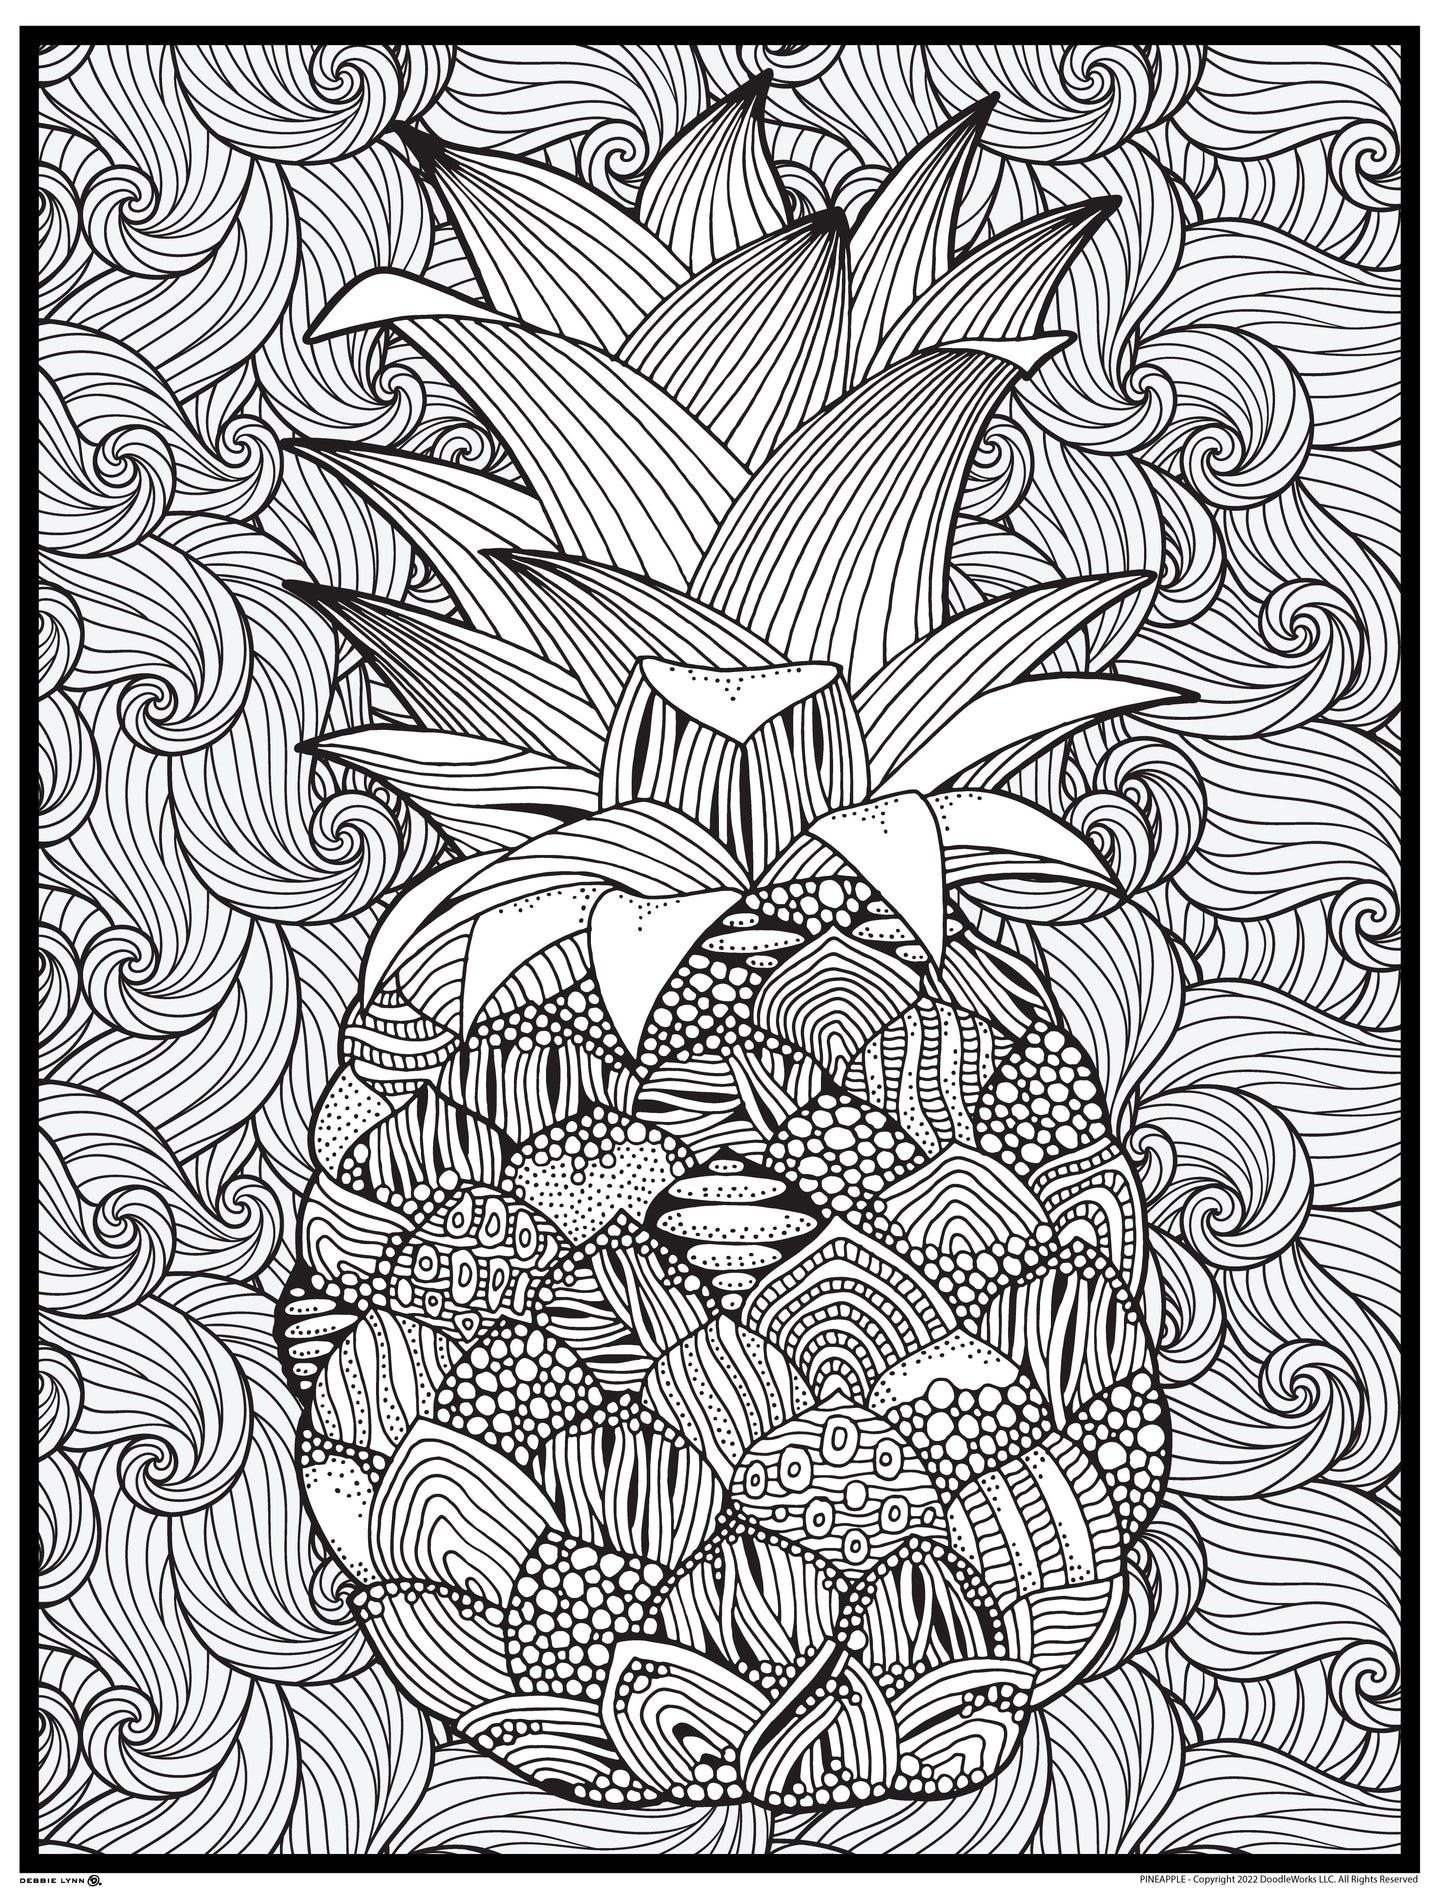 Pineapple Personalized Giant Coloring Poster 46"x60"